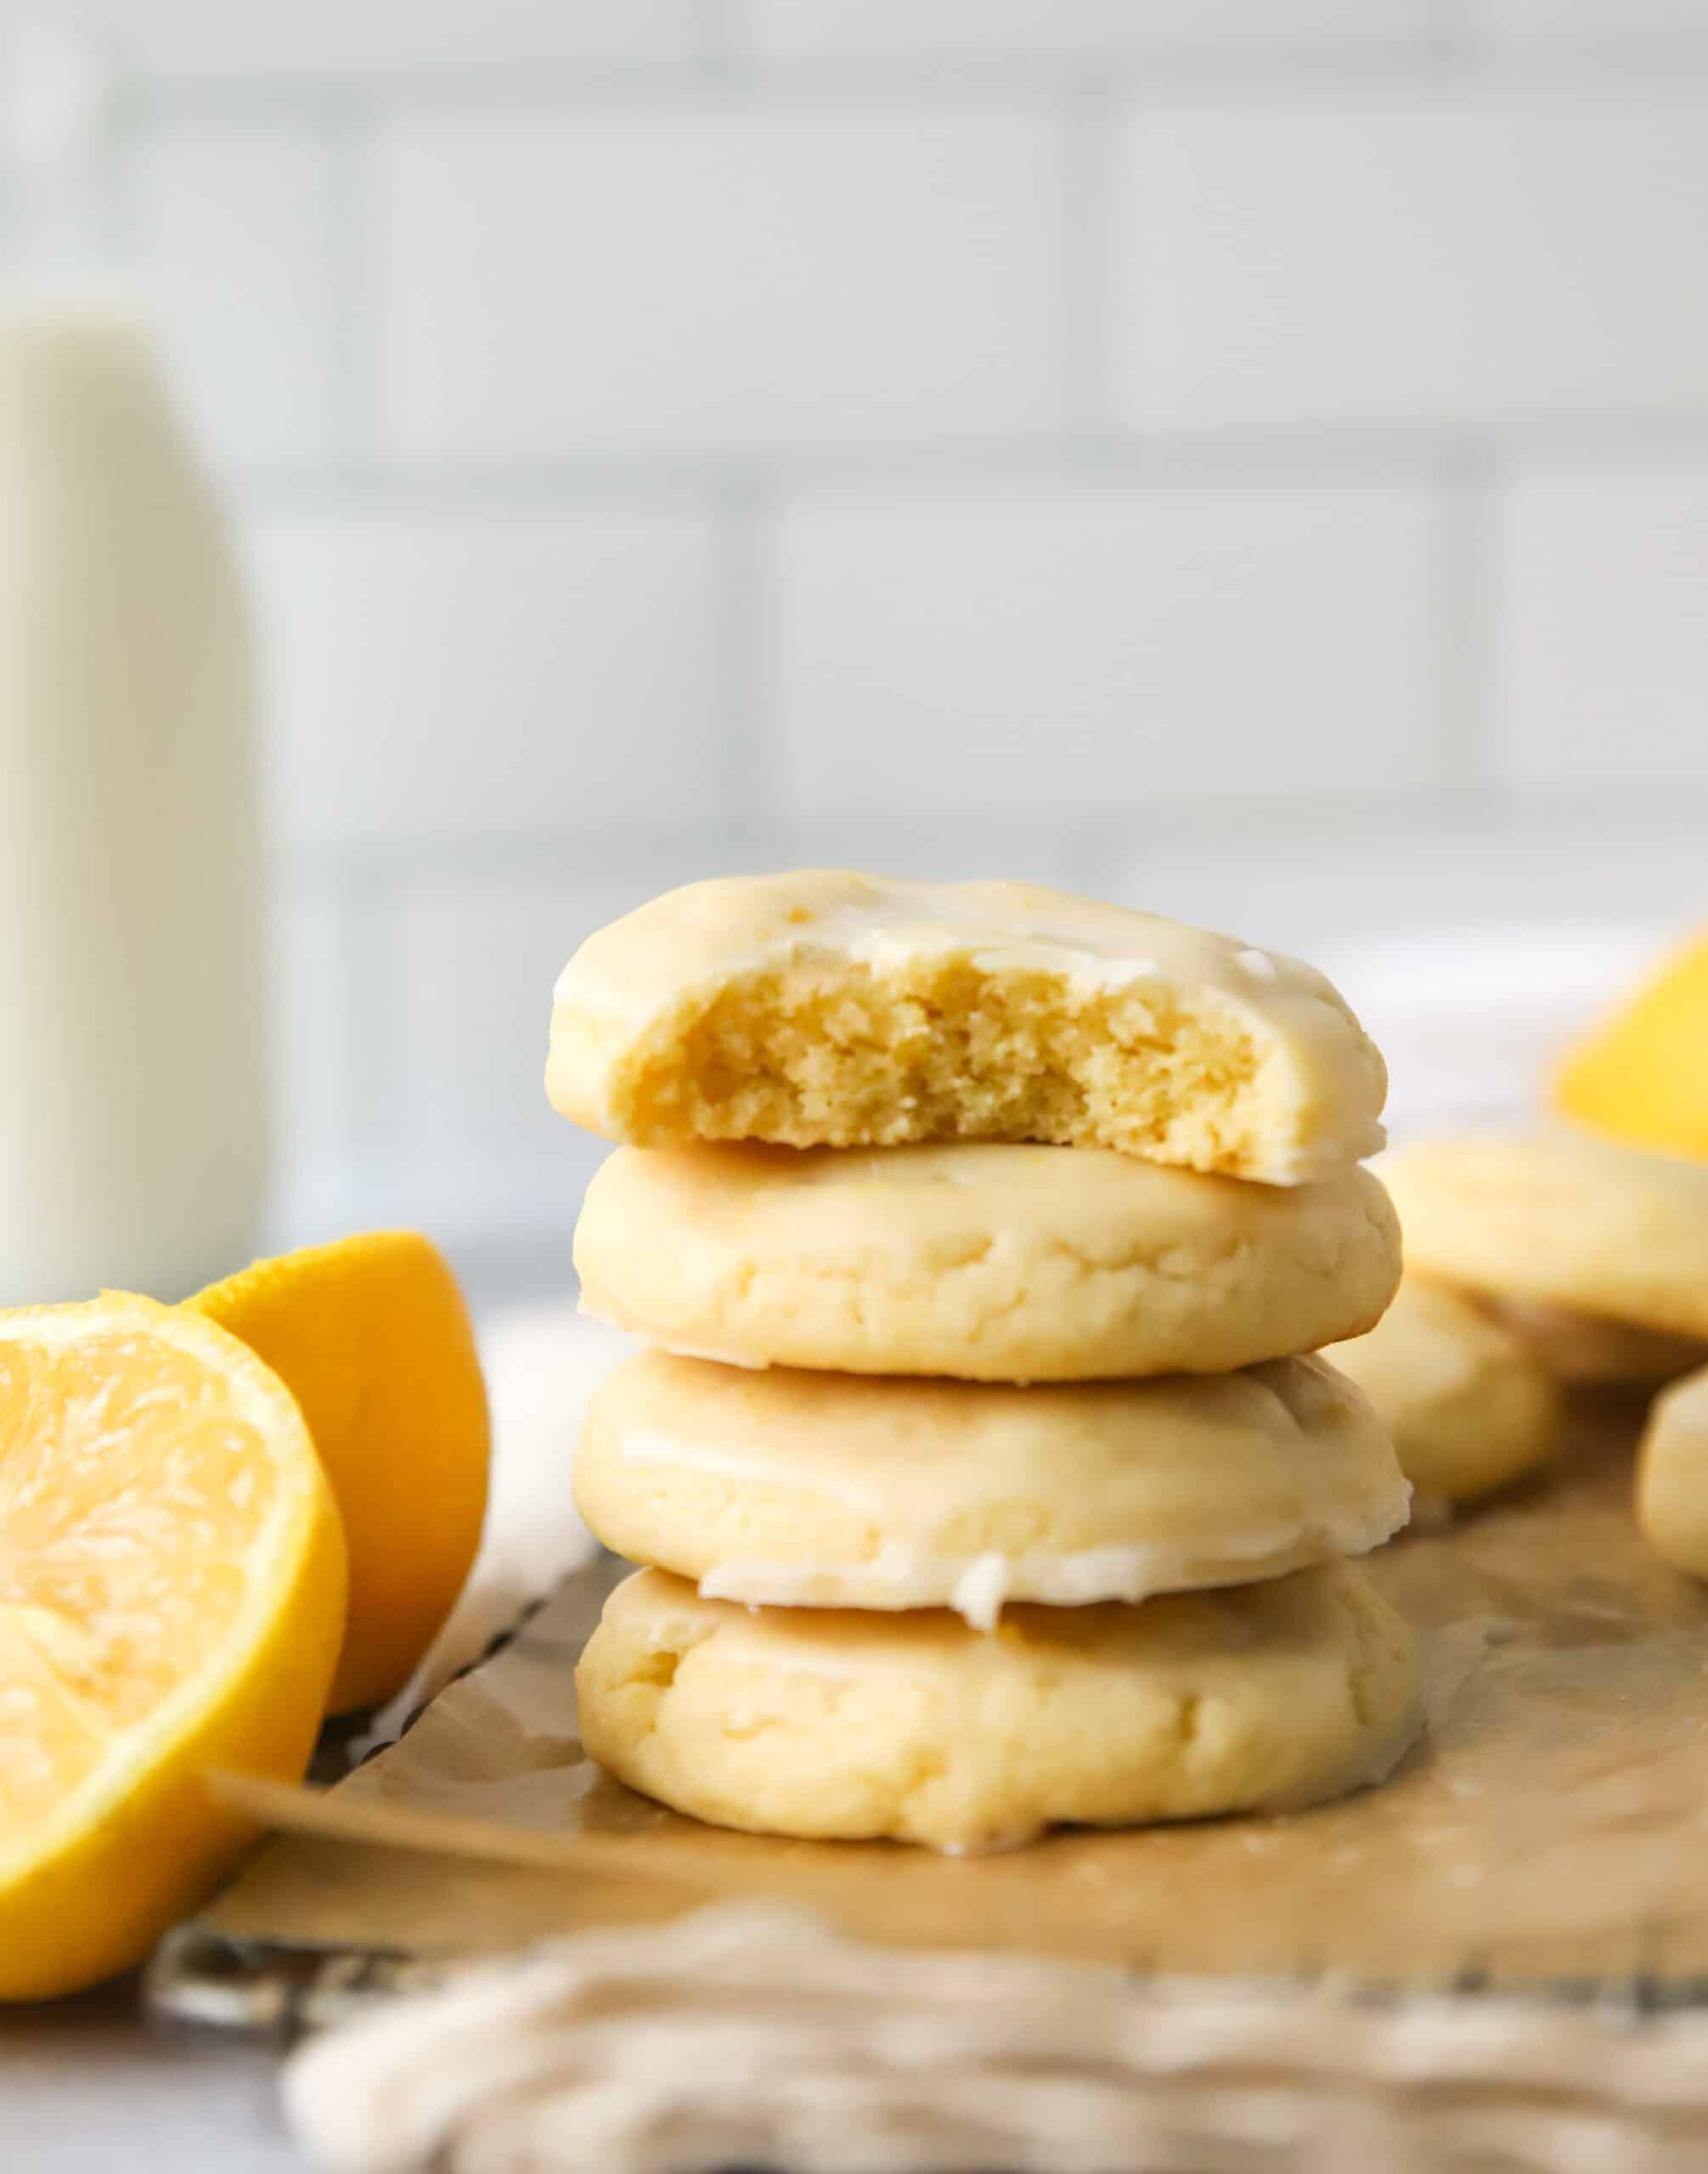 17 Easy Cookie Recipes - Love and Lemons